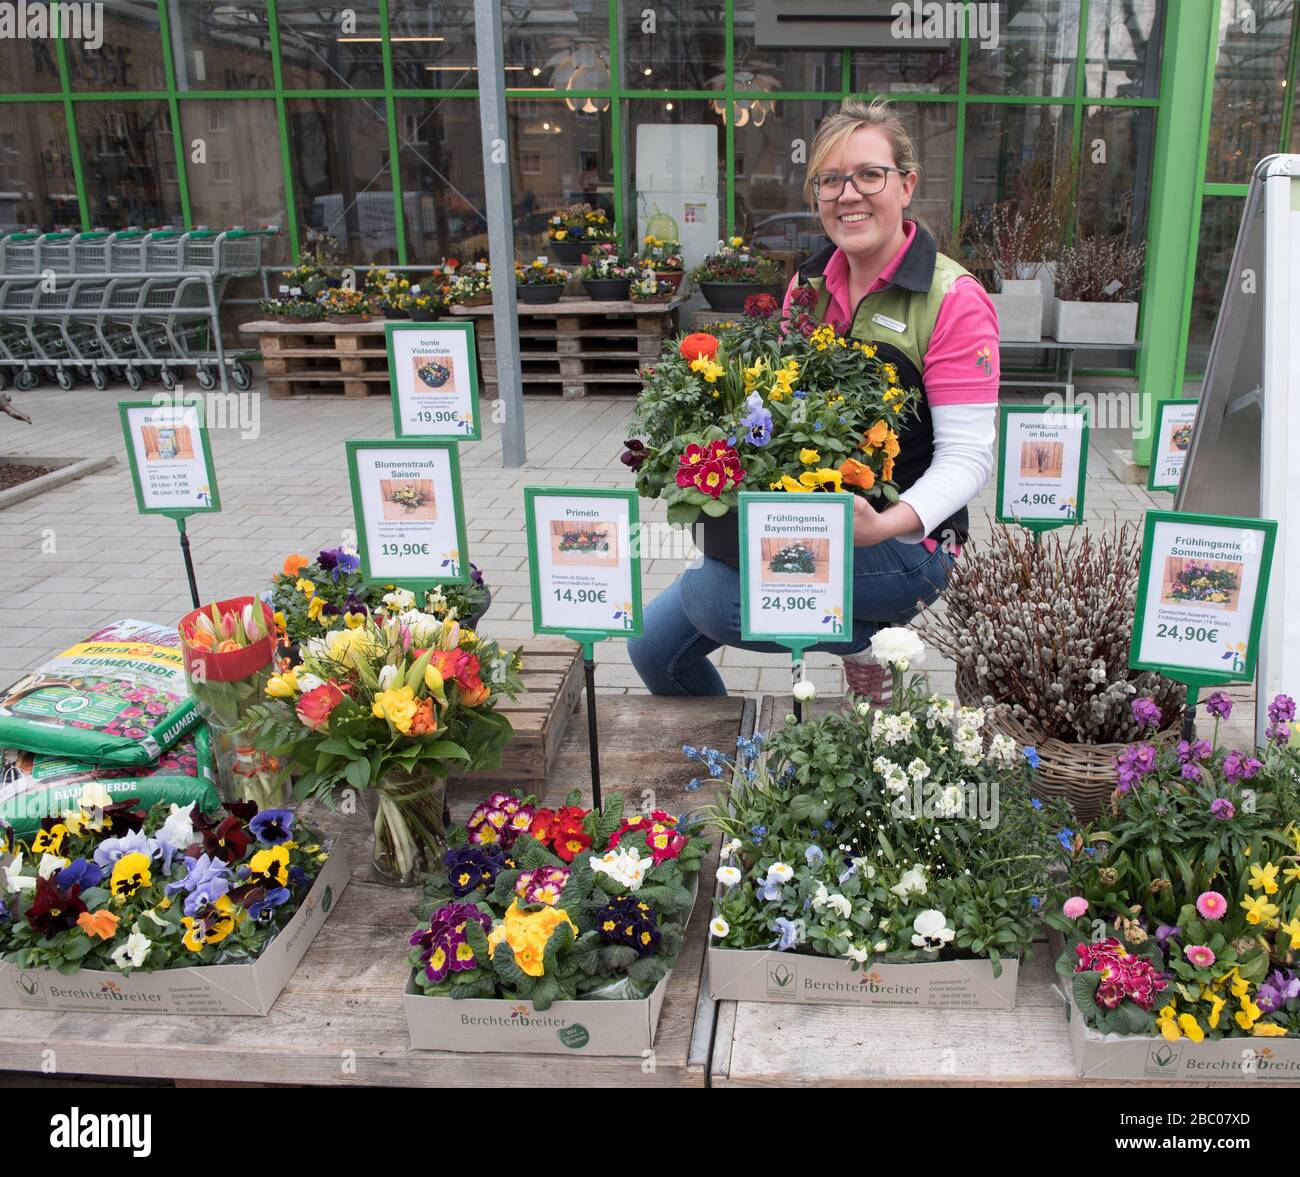 The Berchtenbreiter nursery in Obergiesing has set up a flower taxi to supply its customers with flowers during the corona-related exit restrictions. The picture shows Alexandra Berchtenbreiter with a part of the flower selection that can be ordered online. [automated translation] Stock Photo